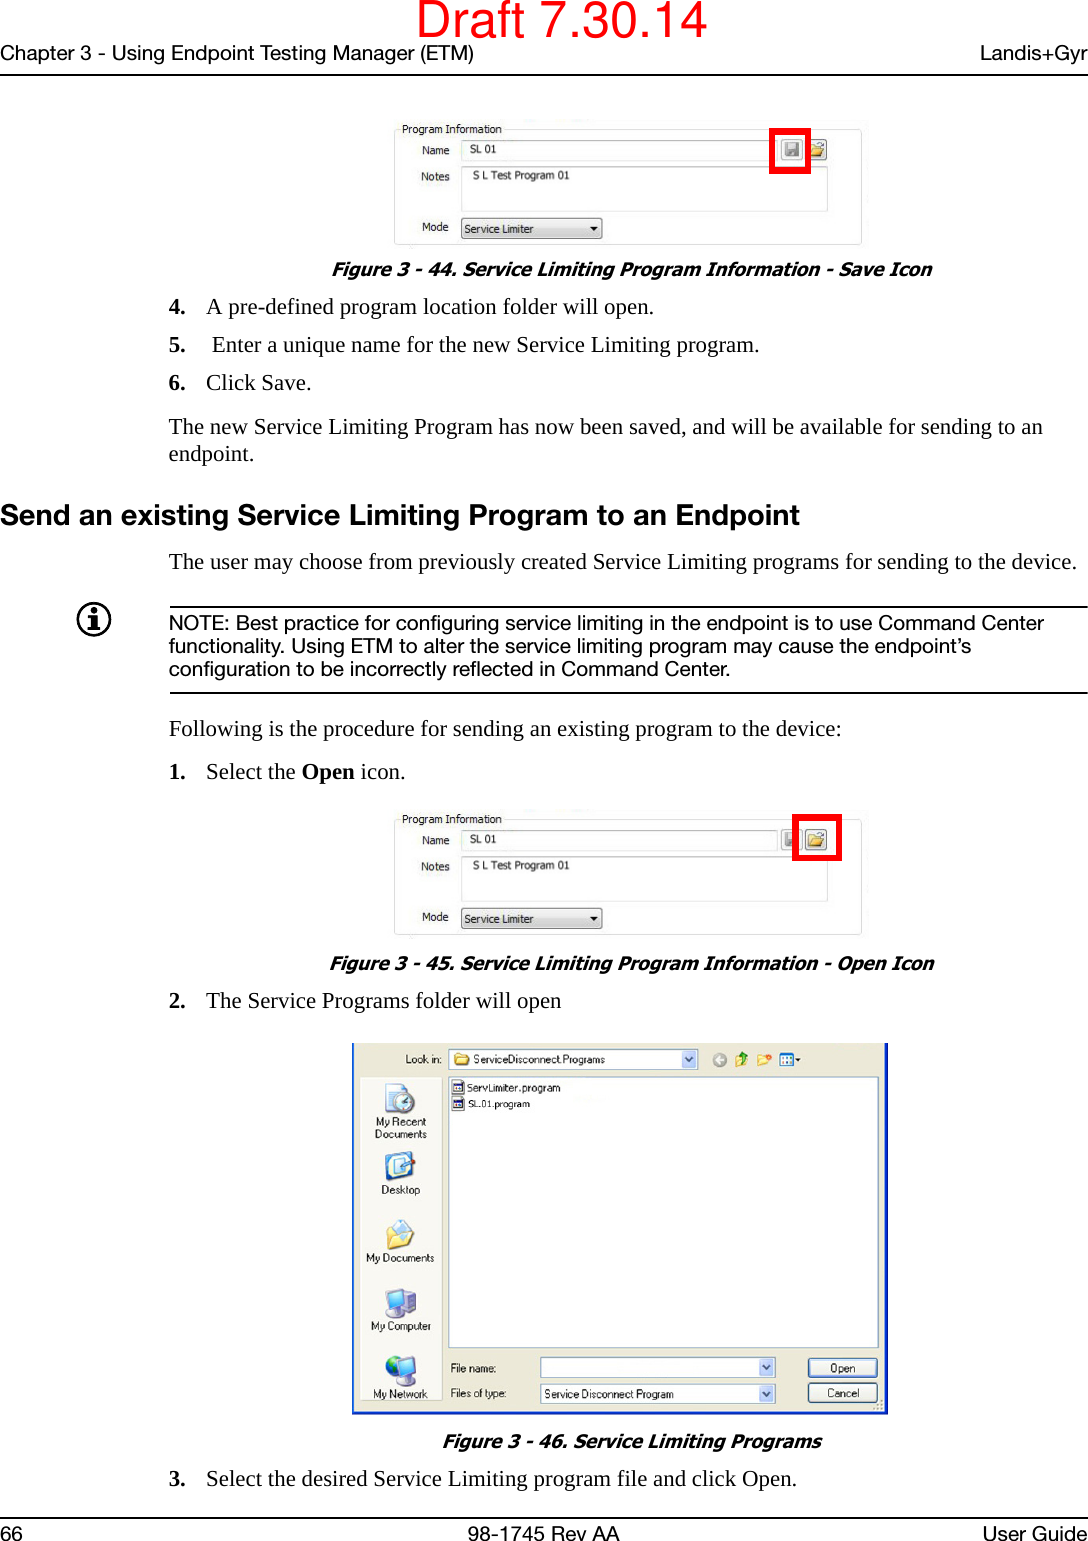 Chapter 3 - Using Endpoint Testing Manager (ETM) Landis+Gyr66 98-1745 Rev AA User Guide Figure 3 - 44. Service Limiting Program Information - Save Icon4. A pre-defined program location folder will open.5.  Enter a unique name for the new Service Limiting program.6. Click Save.The new Service Limiting Program has now been saved, and will be available for sending to an endpoint.Send an existing Service Limiting Program to an EndpointThe user may choose from previously created Service Limiting programs for sending to the device. NOTE: Best practice for configuring service limiting in the endpoint is to use Command Center functionality. Using ETM to alter the service limiting program may cause the endpoint’s configuration to be incorrectly reflected in Command Center. Following is the procedure for sending an existing program to the device:1. Select the Open icon. Figure 3 - 45. Service Limiting Program Information - Open Icon2. The Service Programs folder will open Figure 3 - 46. Service Limiting Programs3. Select the desired Service Limiting program file and click Open.Draft 7.30.14